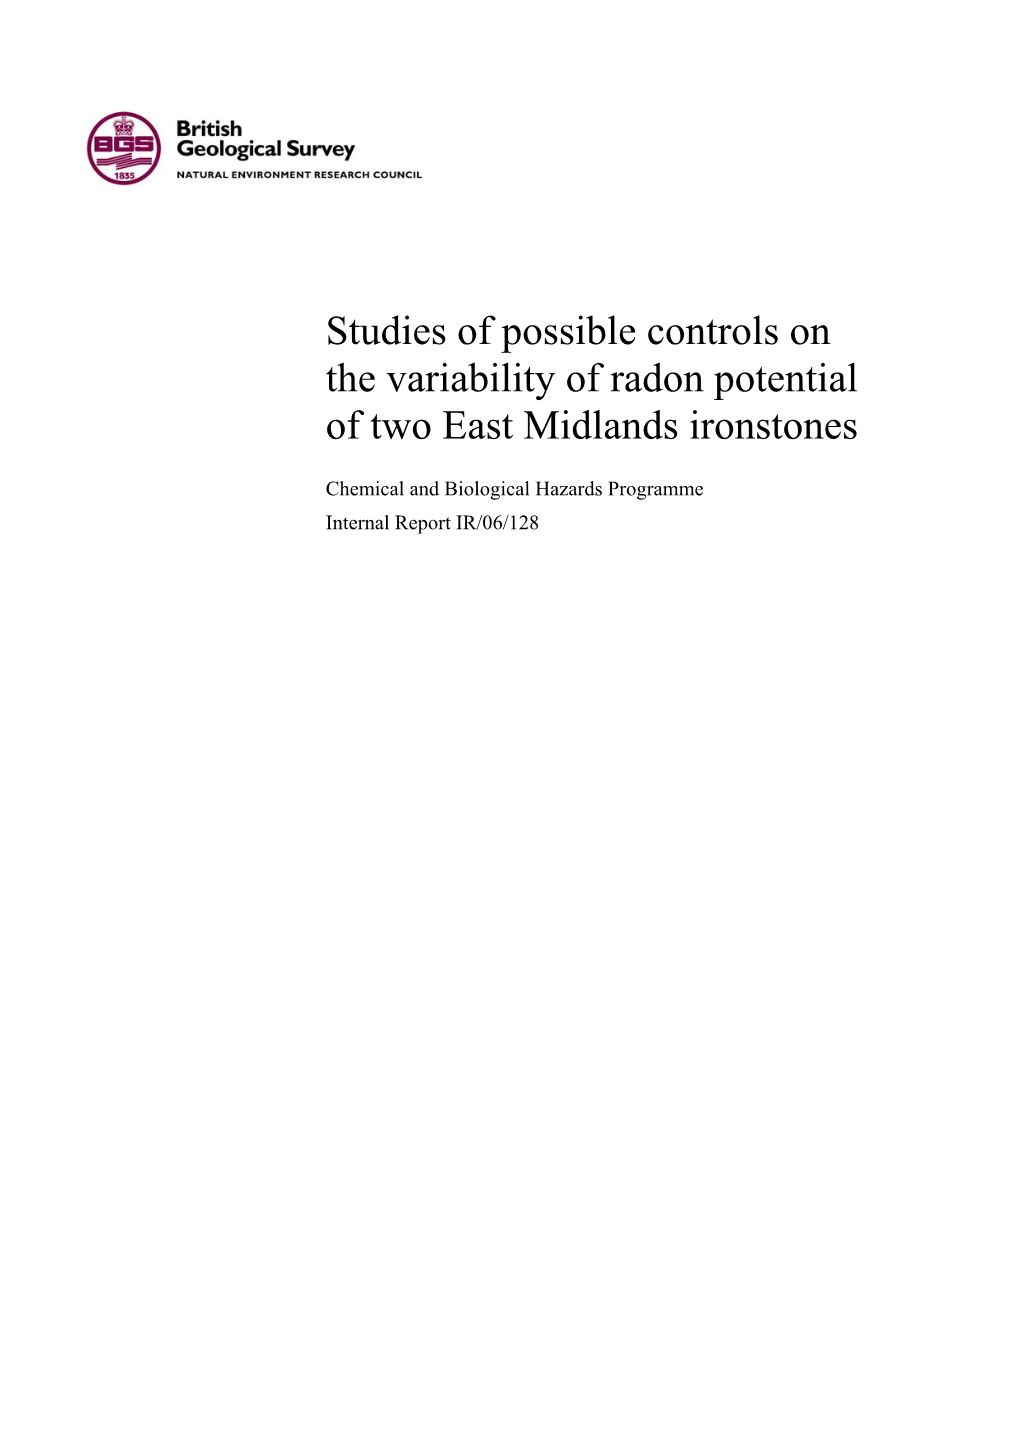 Studies of Possible Controls on the Variability of Radon Potential of Two East Midlands Ironstones